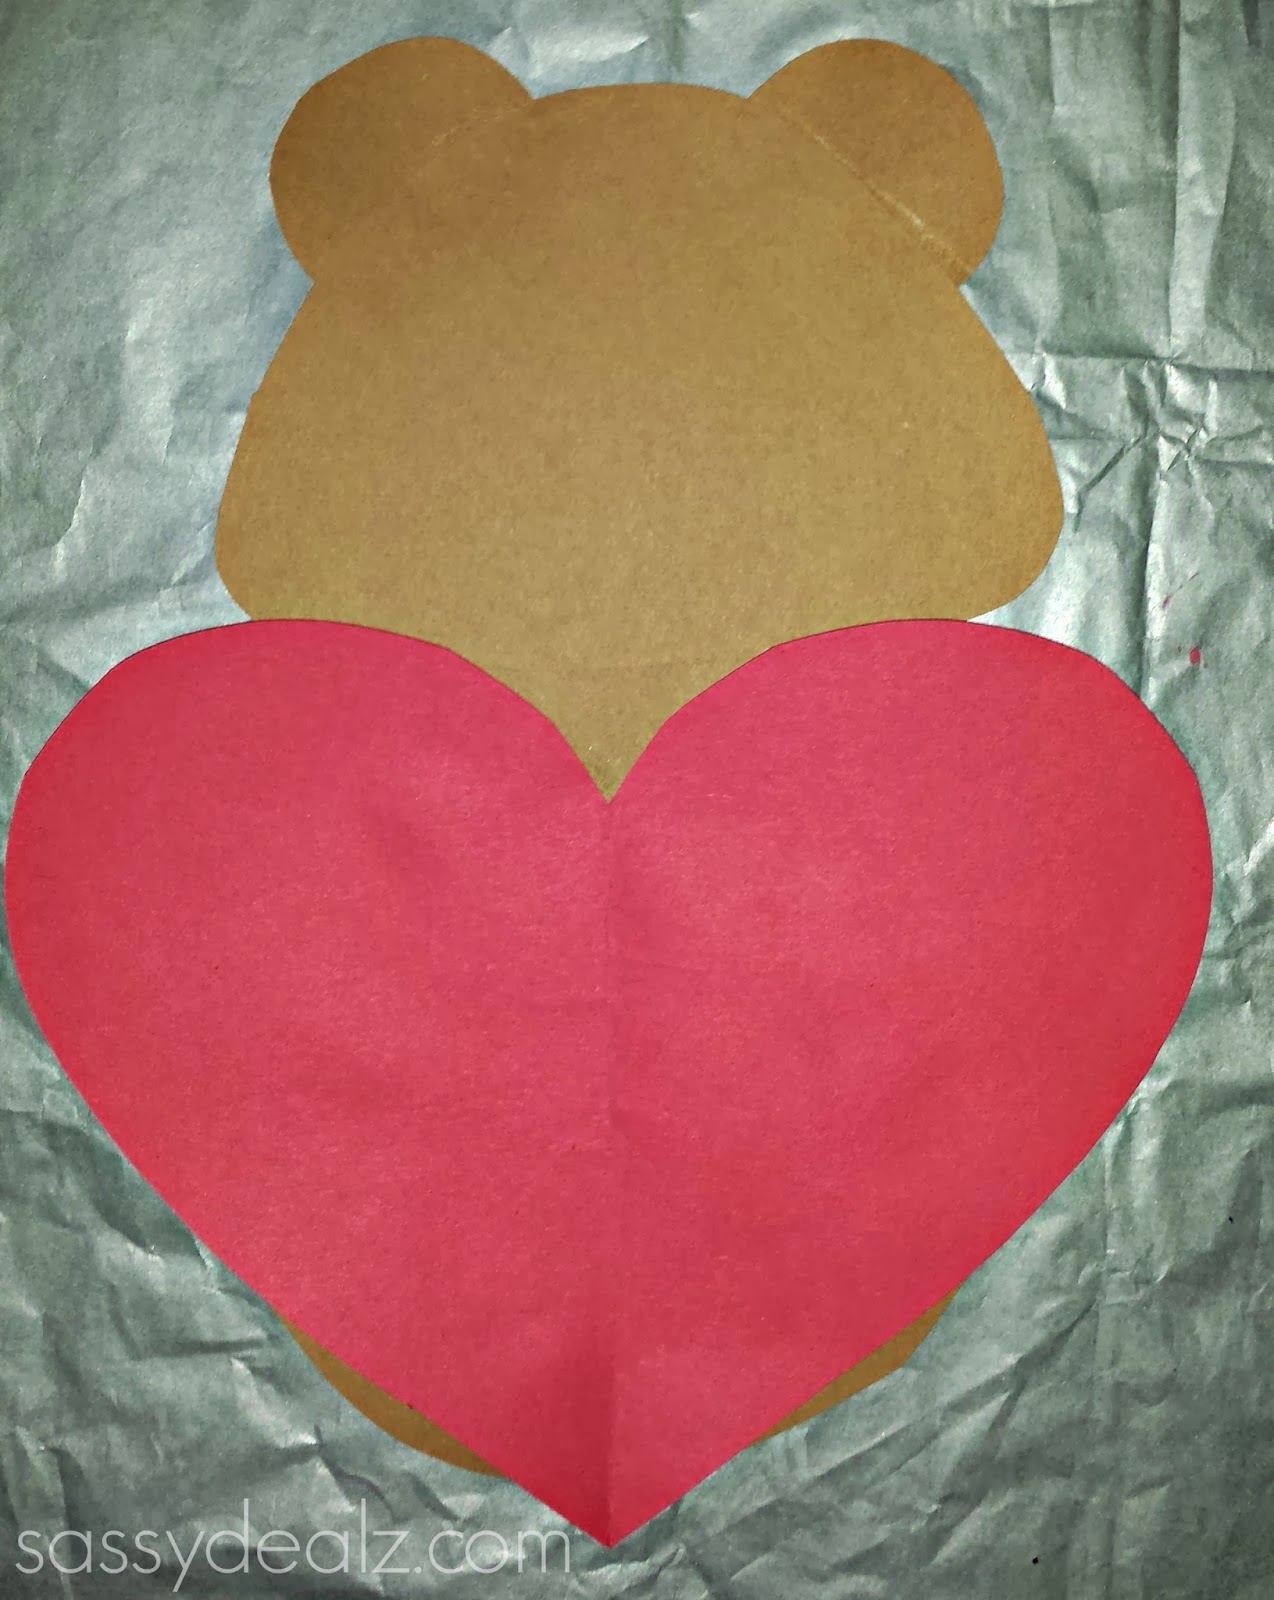 "I Love You Beary Much" Valentine Bear Craft For Kids - Crafty Morning